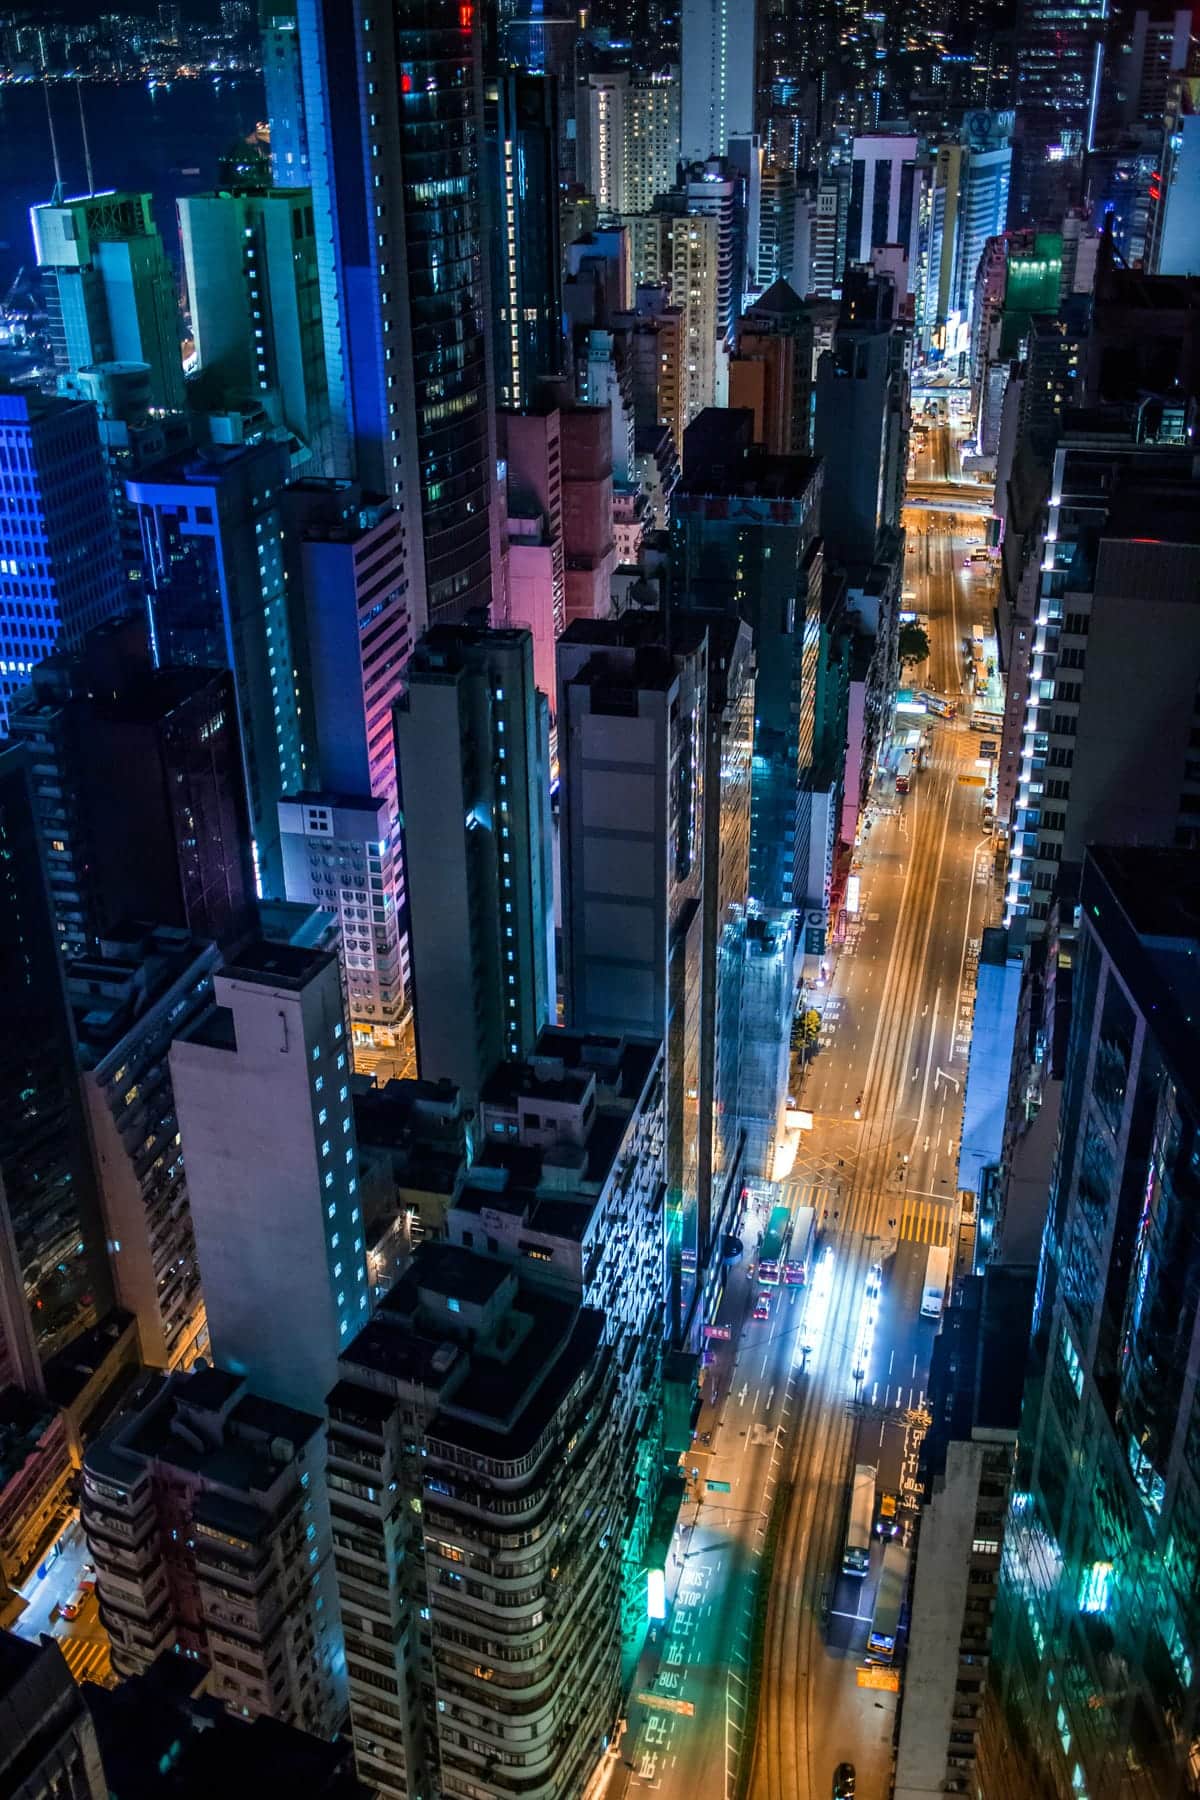 A photo showing a top-down view of a Hong Kong street at night.